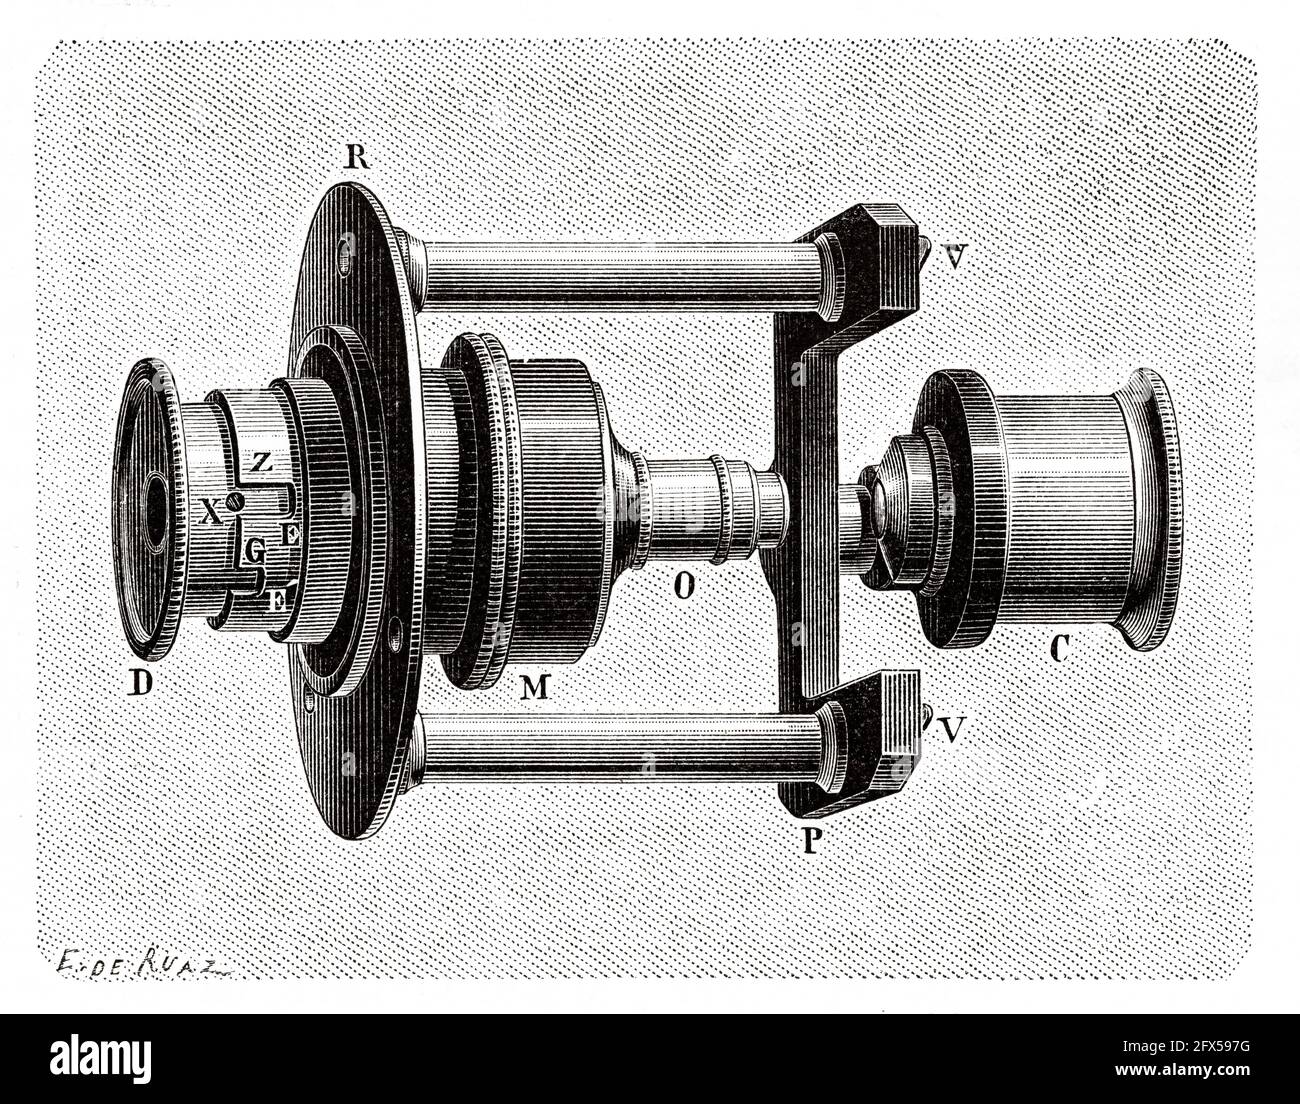 Photomicrography. Lemardeley photographic microscope. Old 19th century engraved illustration from La Nature 1893 Stock Photo